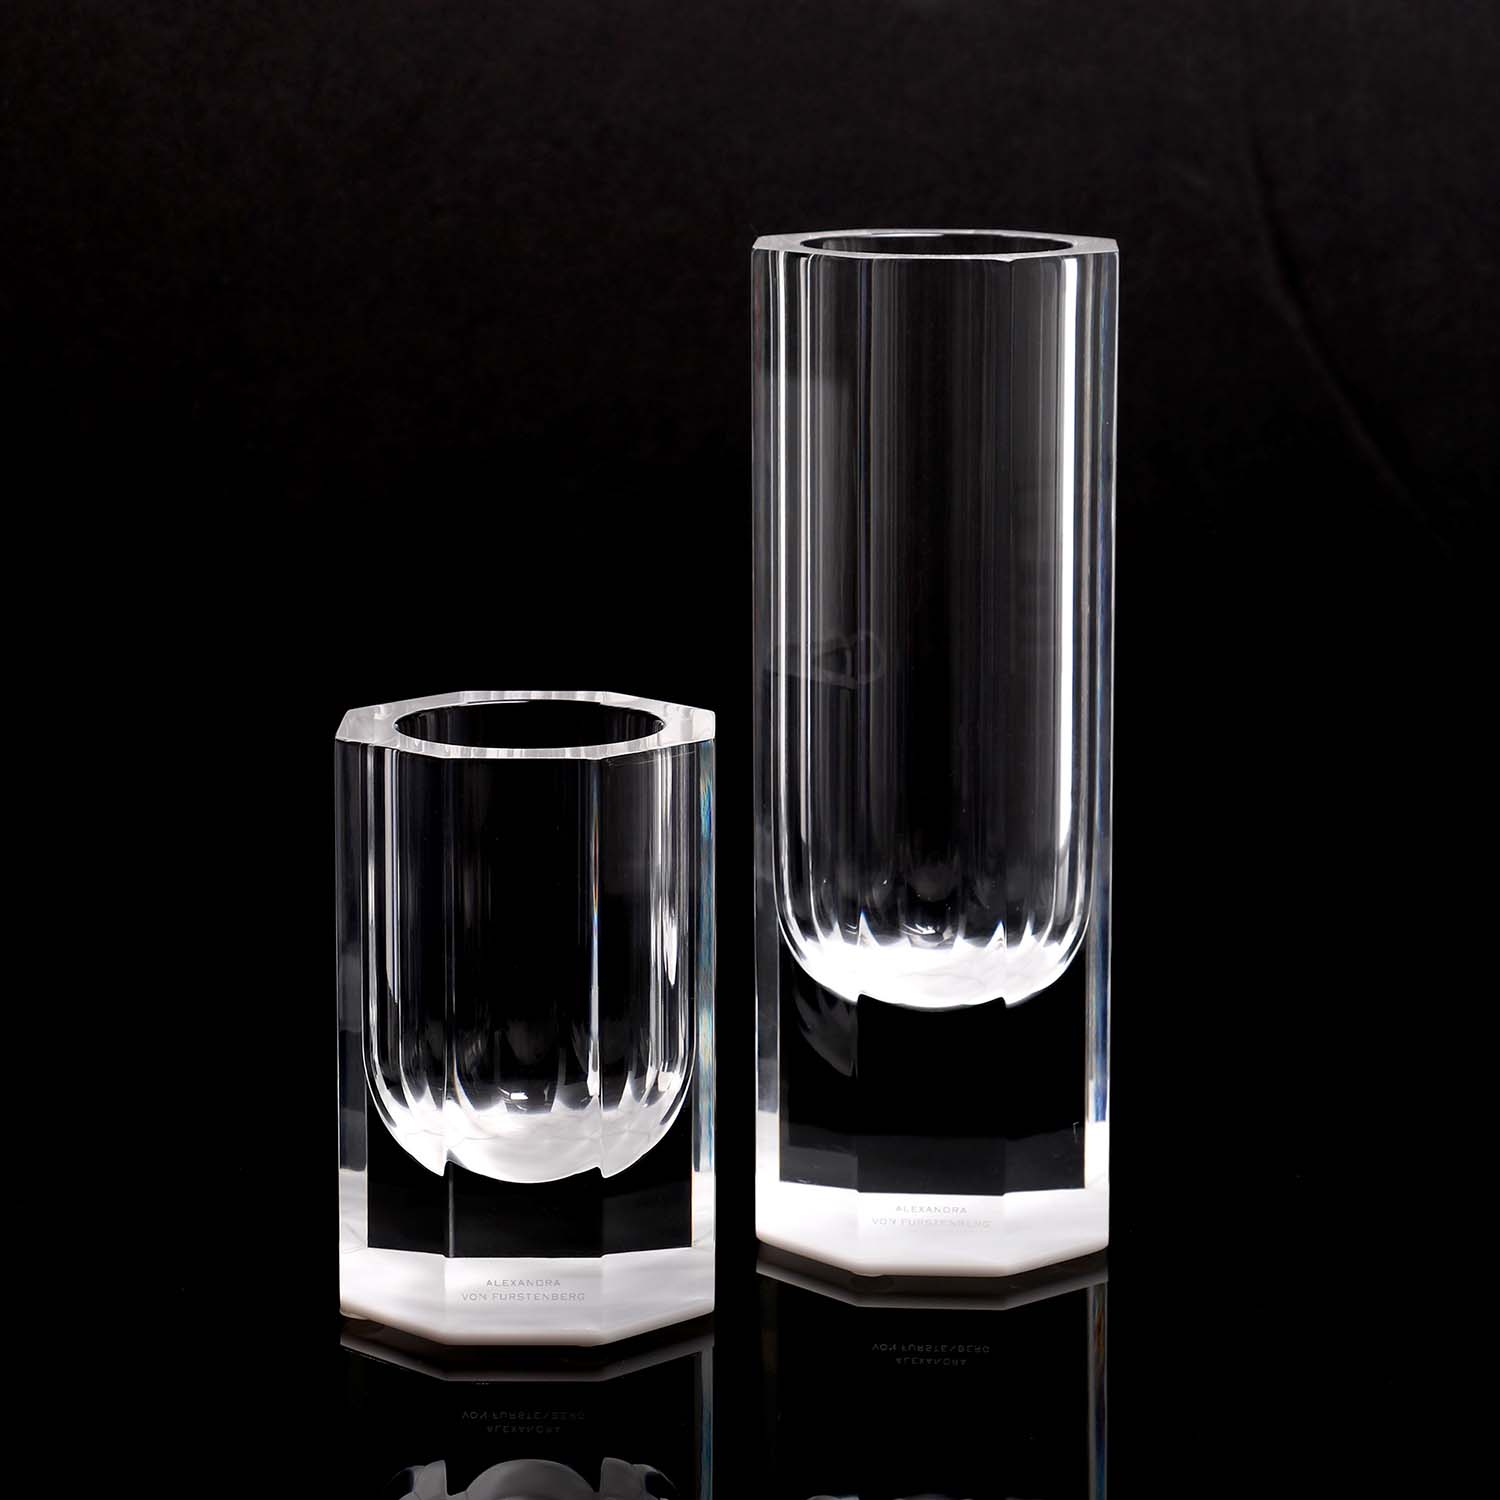 Two elegant glass cylinders with mirror-like reflection and sleek design.